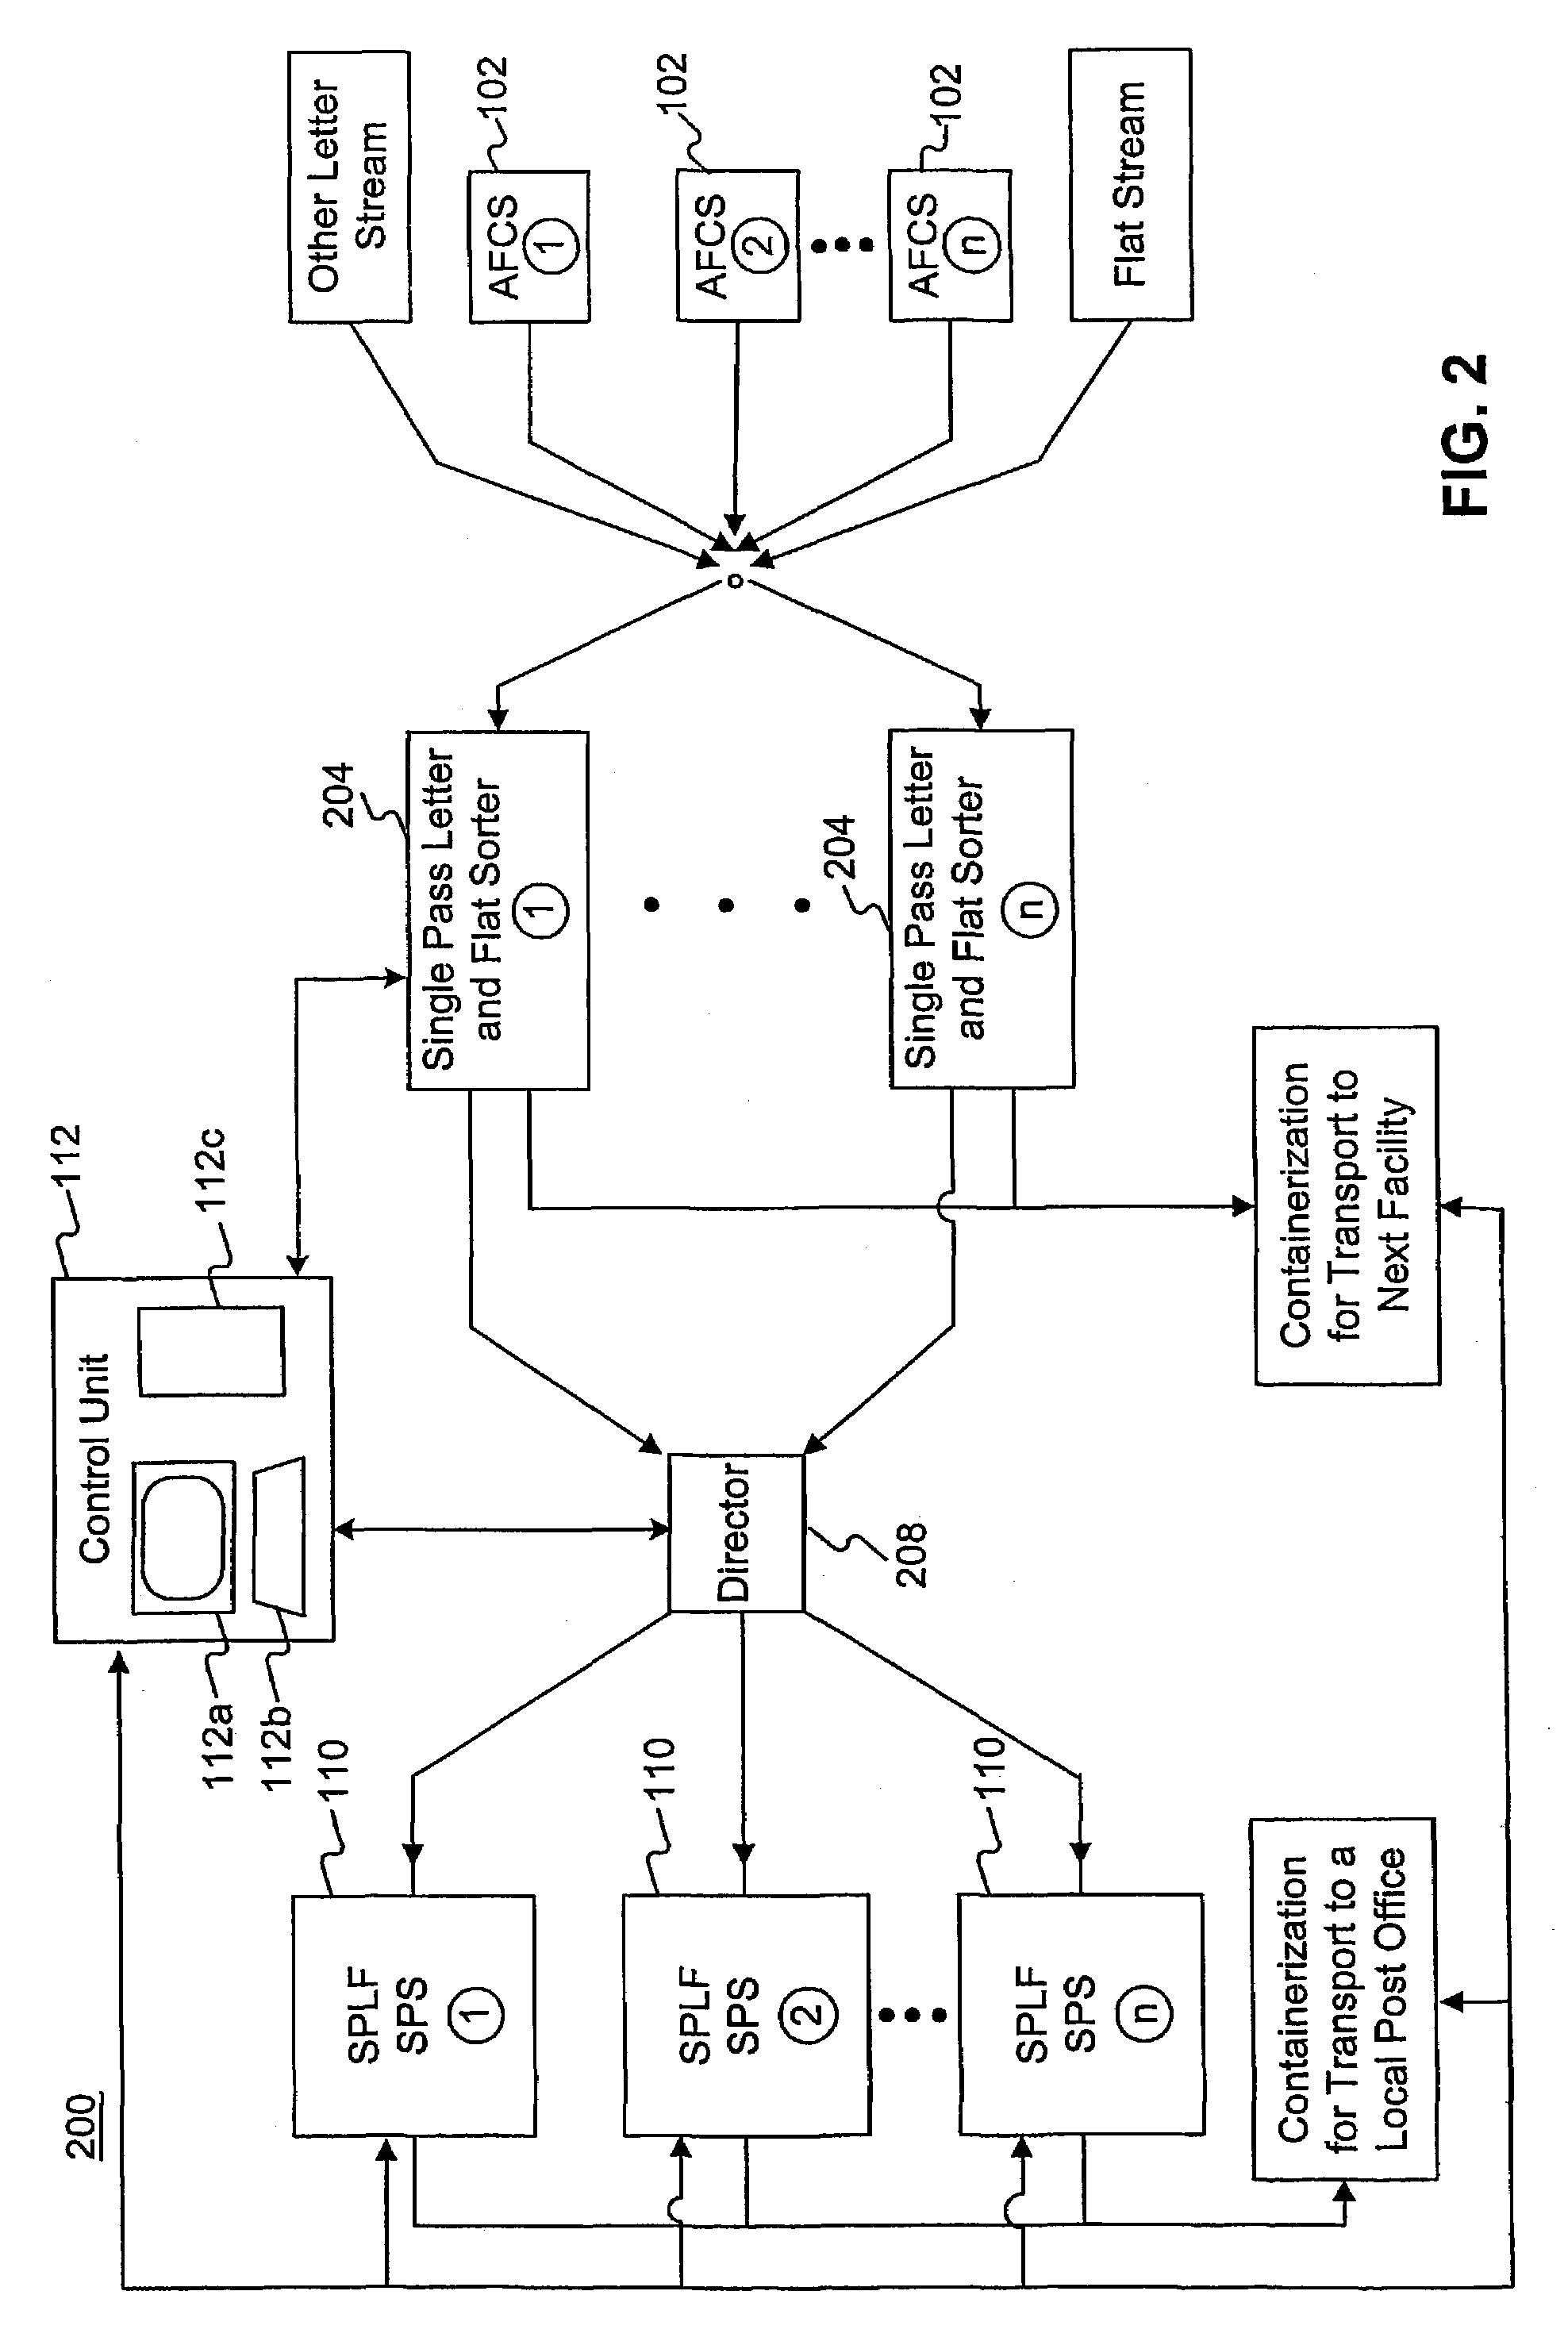 Method and system for single pass letter and flat processing